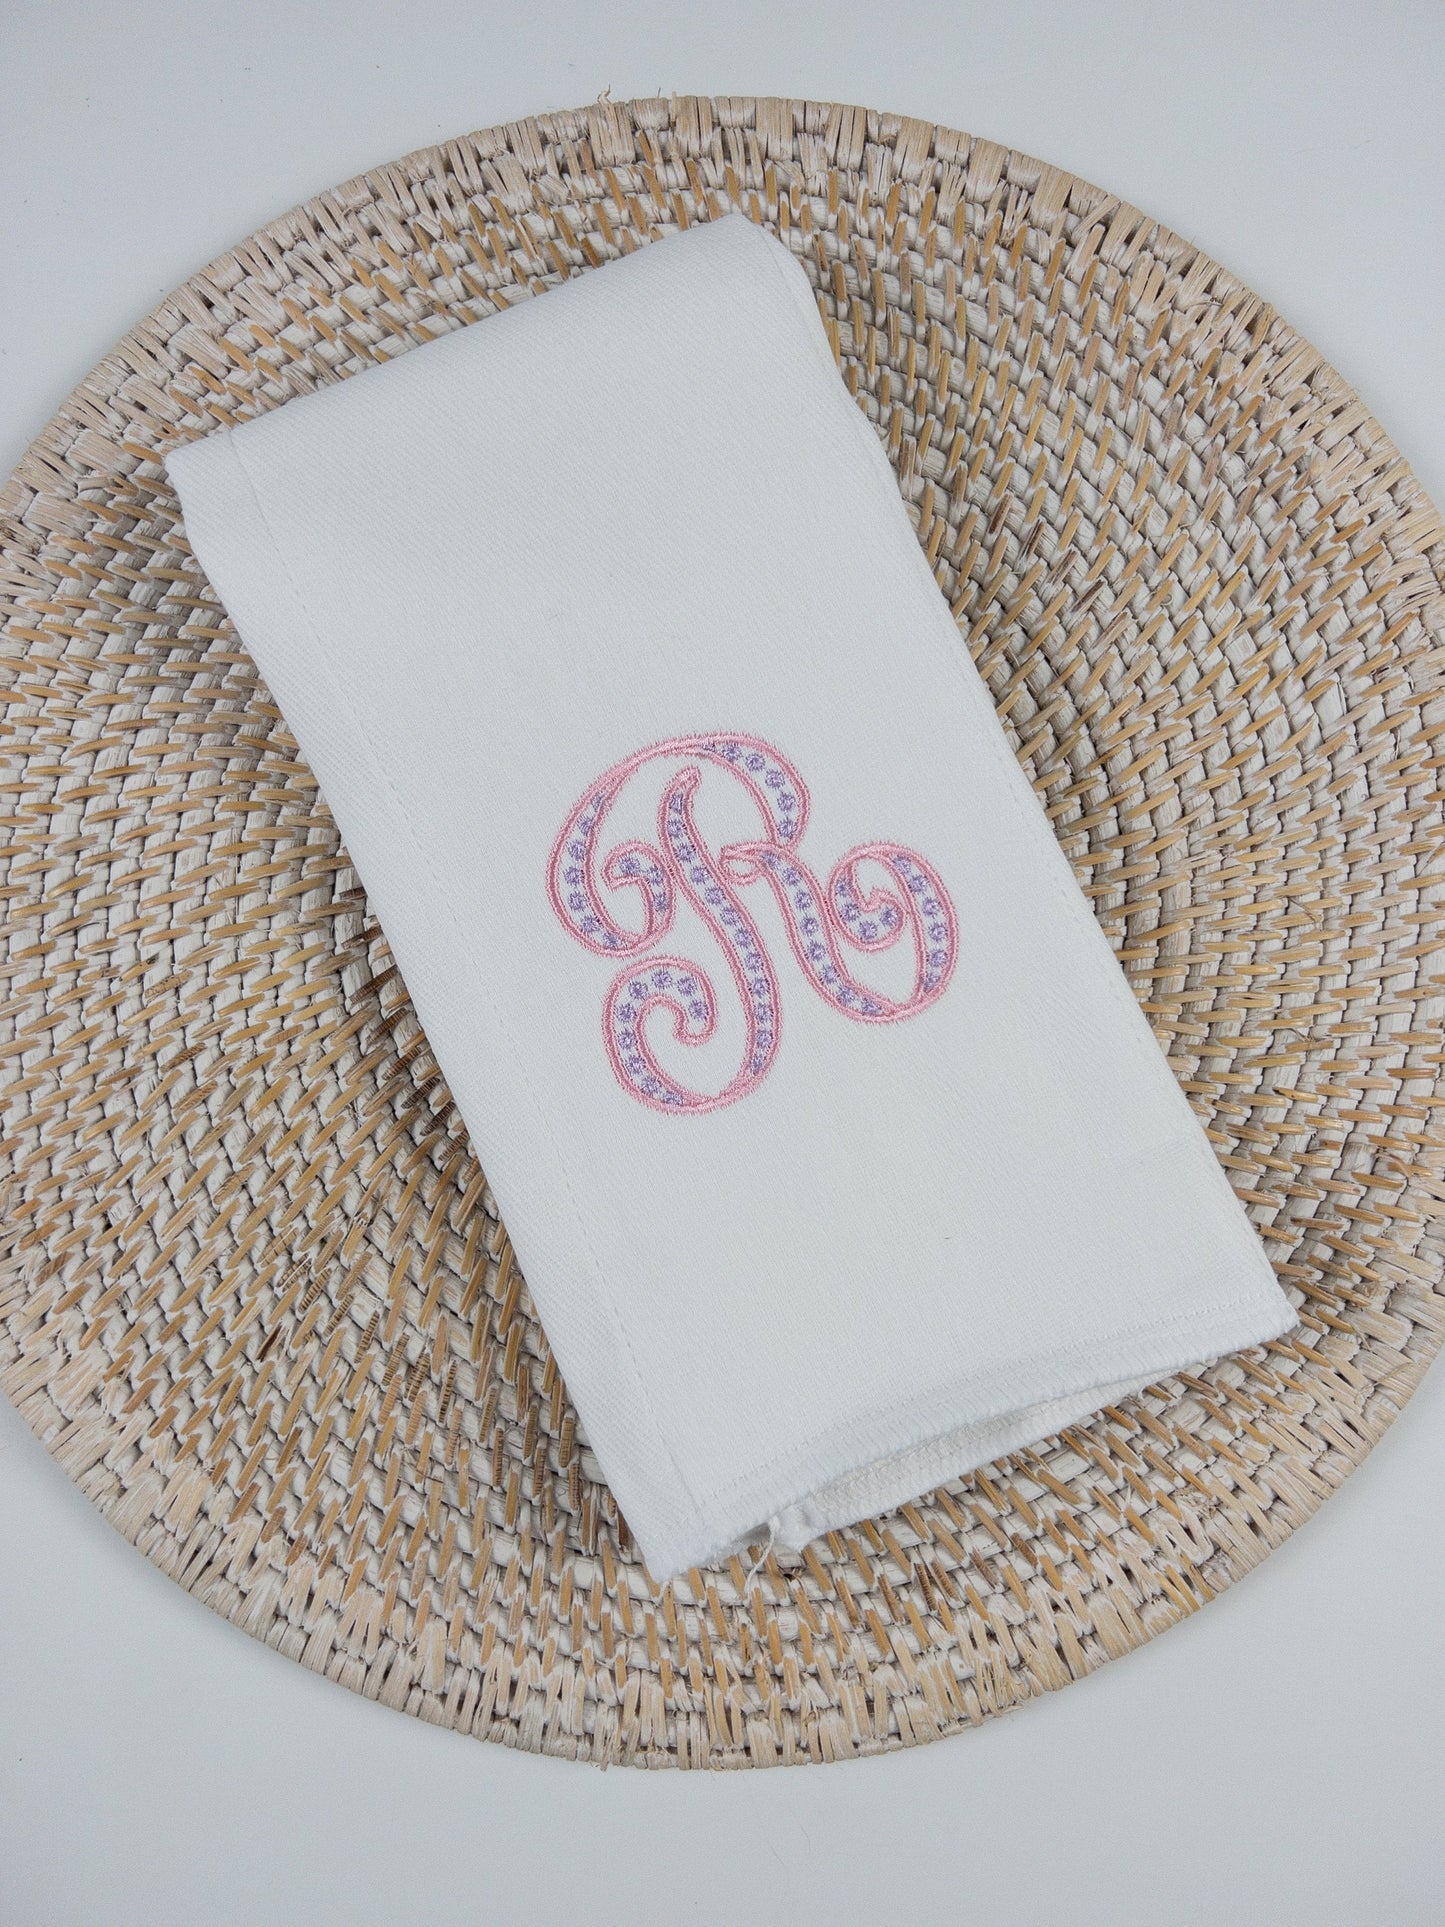 Cute Monogrammed Burp Cloth, Two color Monogram Girly Burp Cloth, Classic Baby Gift, Thoughtful Baby Gift